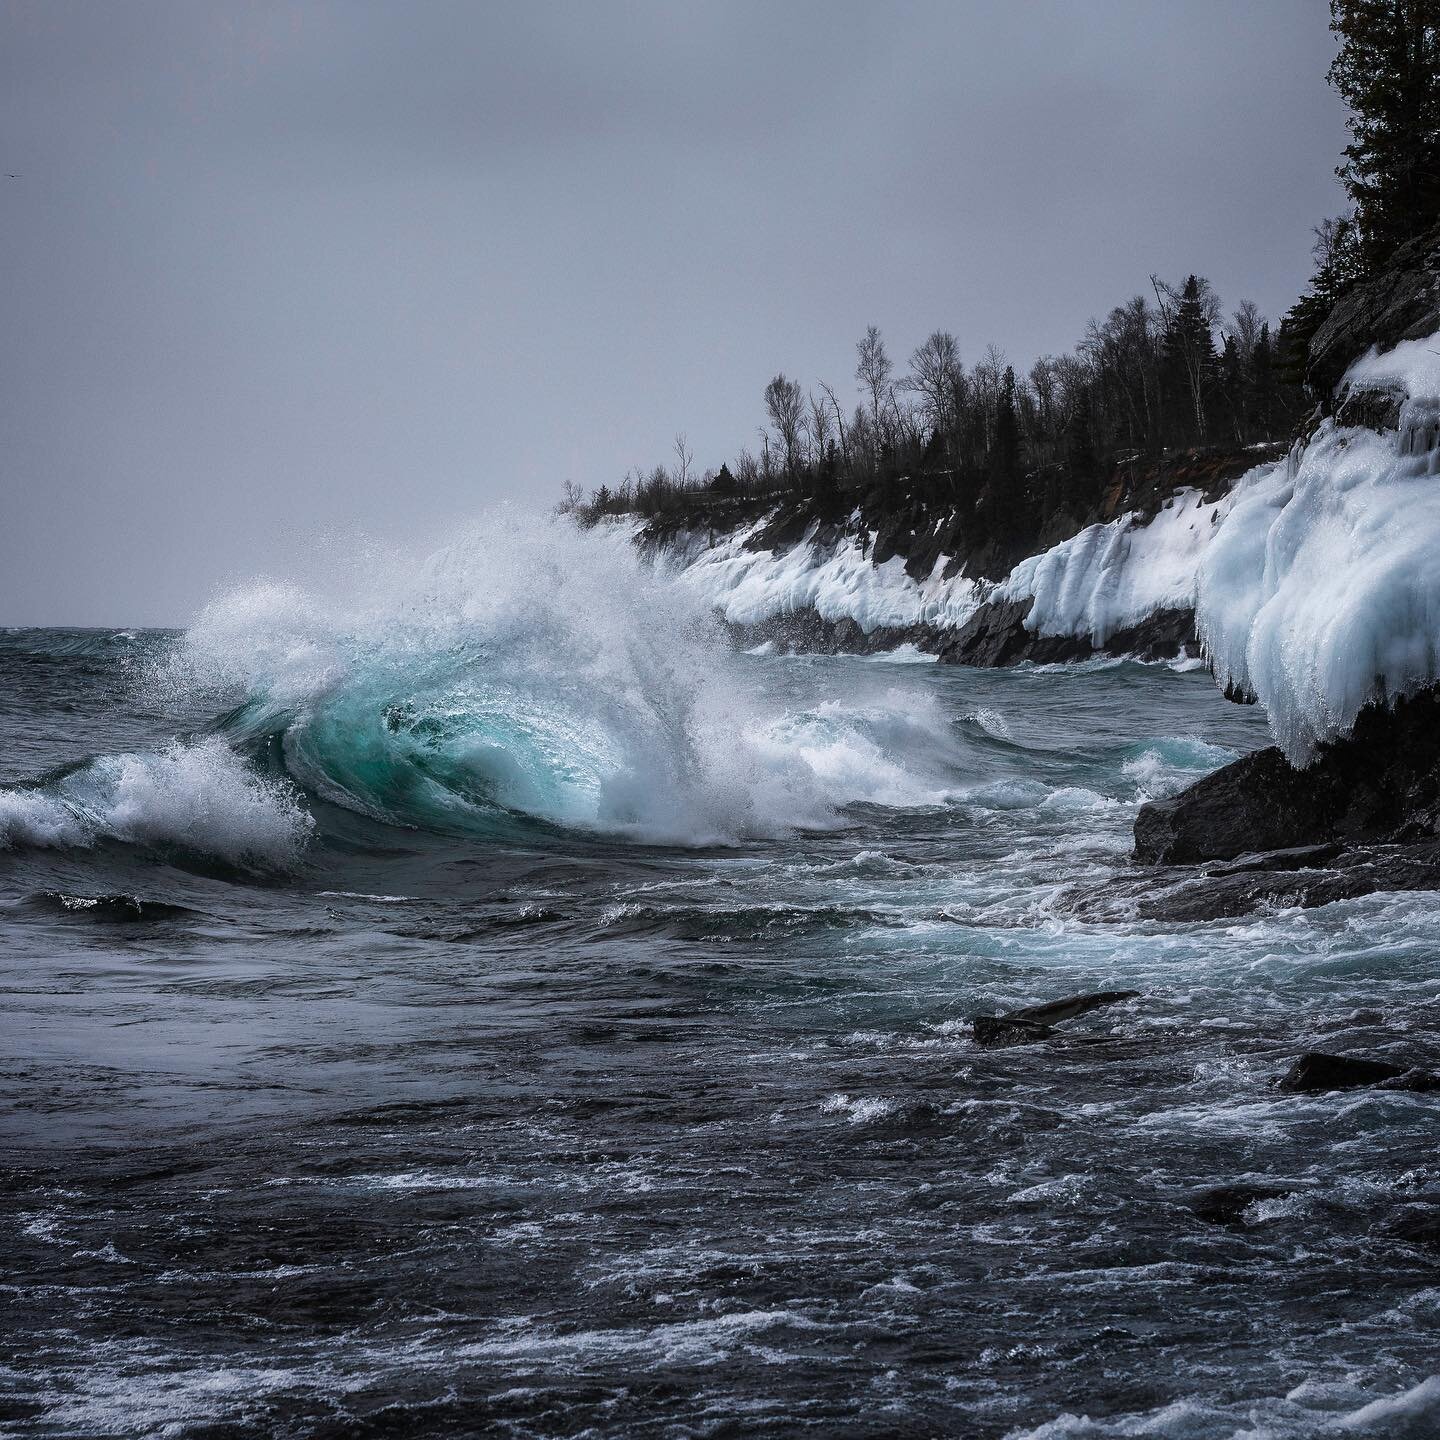 The waves on Lake Superior yesterday certainly weren&rsquo;t as big as the November gales, but the color in theses curls was incredible.
.
.
.
.
.
#lakesuperior #lakesuperiormagazine #lakesuperiornorthshore #lakesuperiormn #gitchegumee #northshoremn 